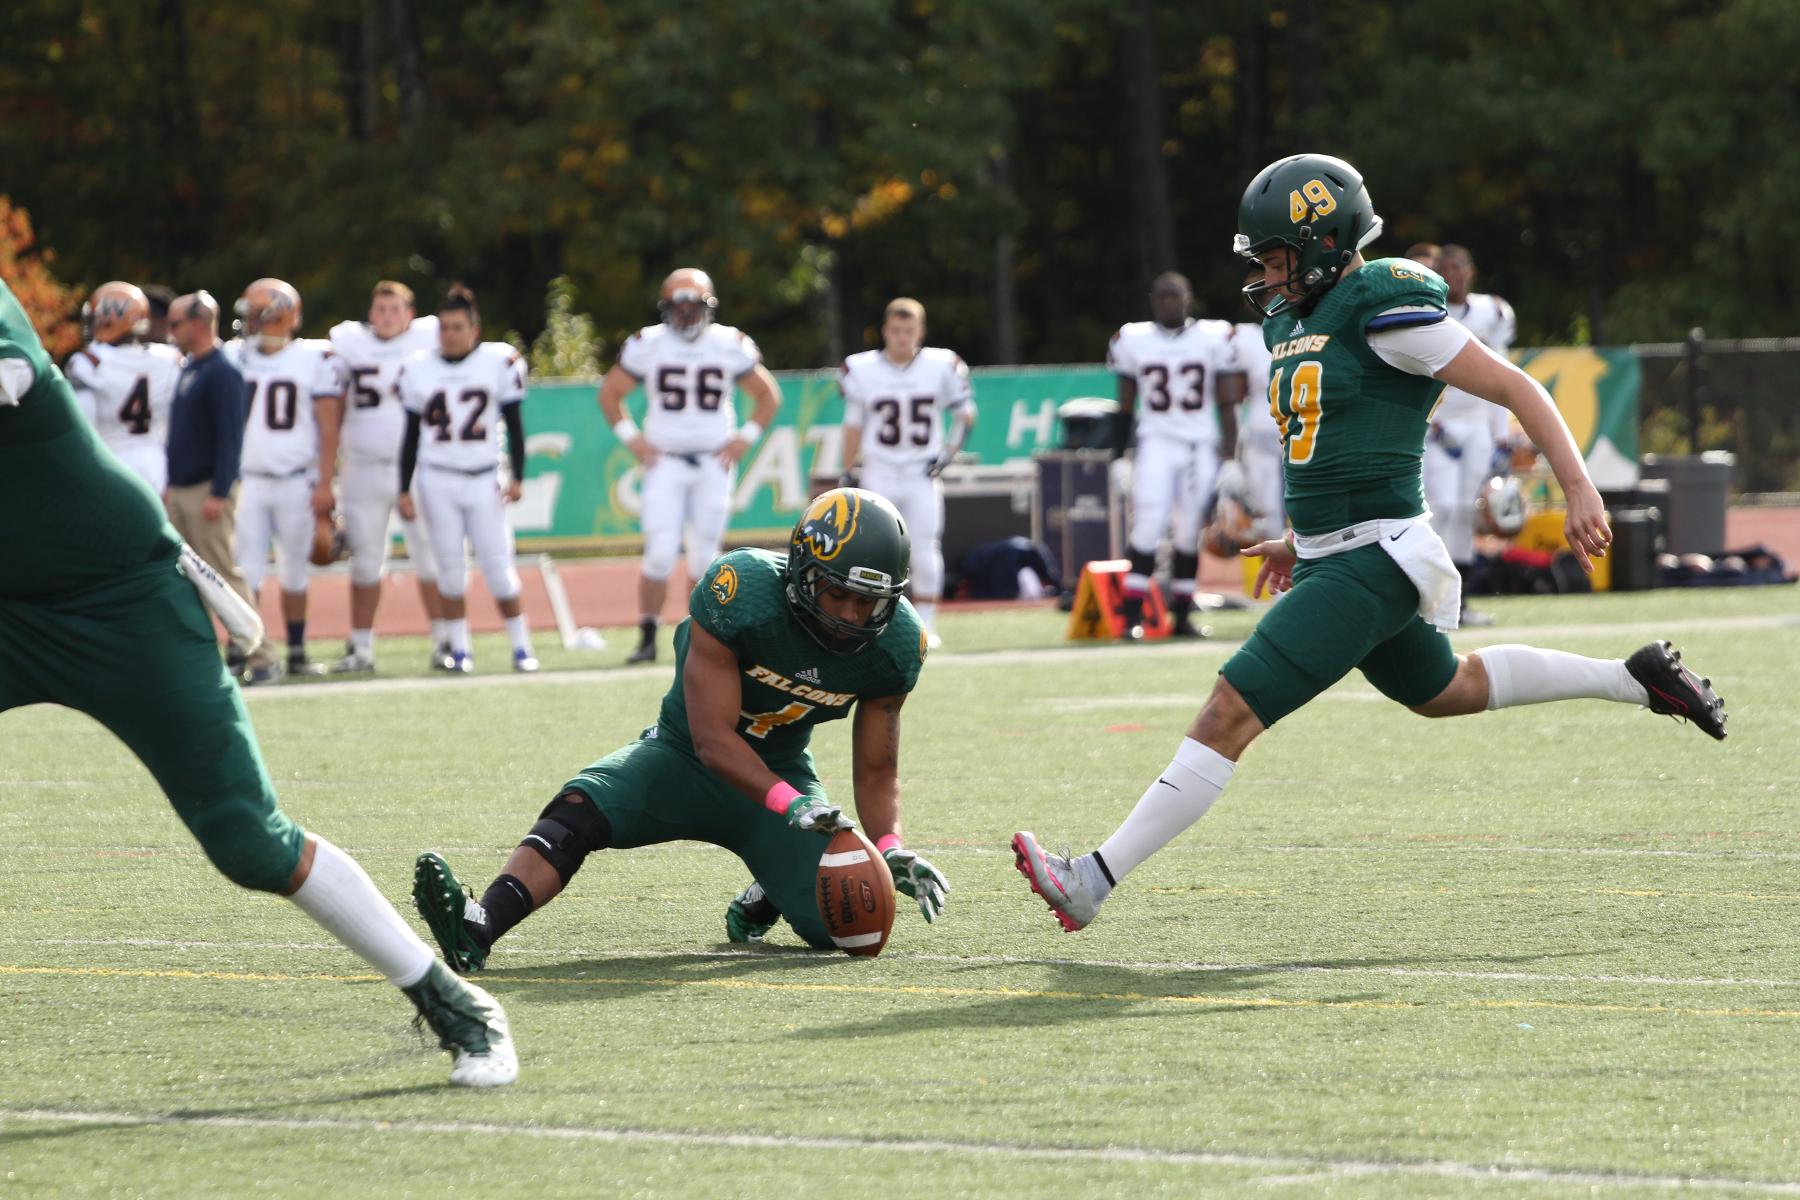 Falcons Notch First Conference Win vs. Western Connecticut, 17-14